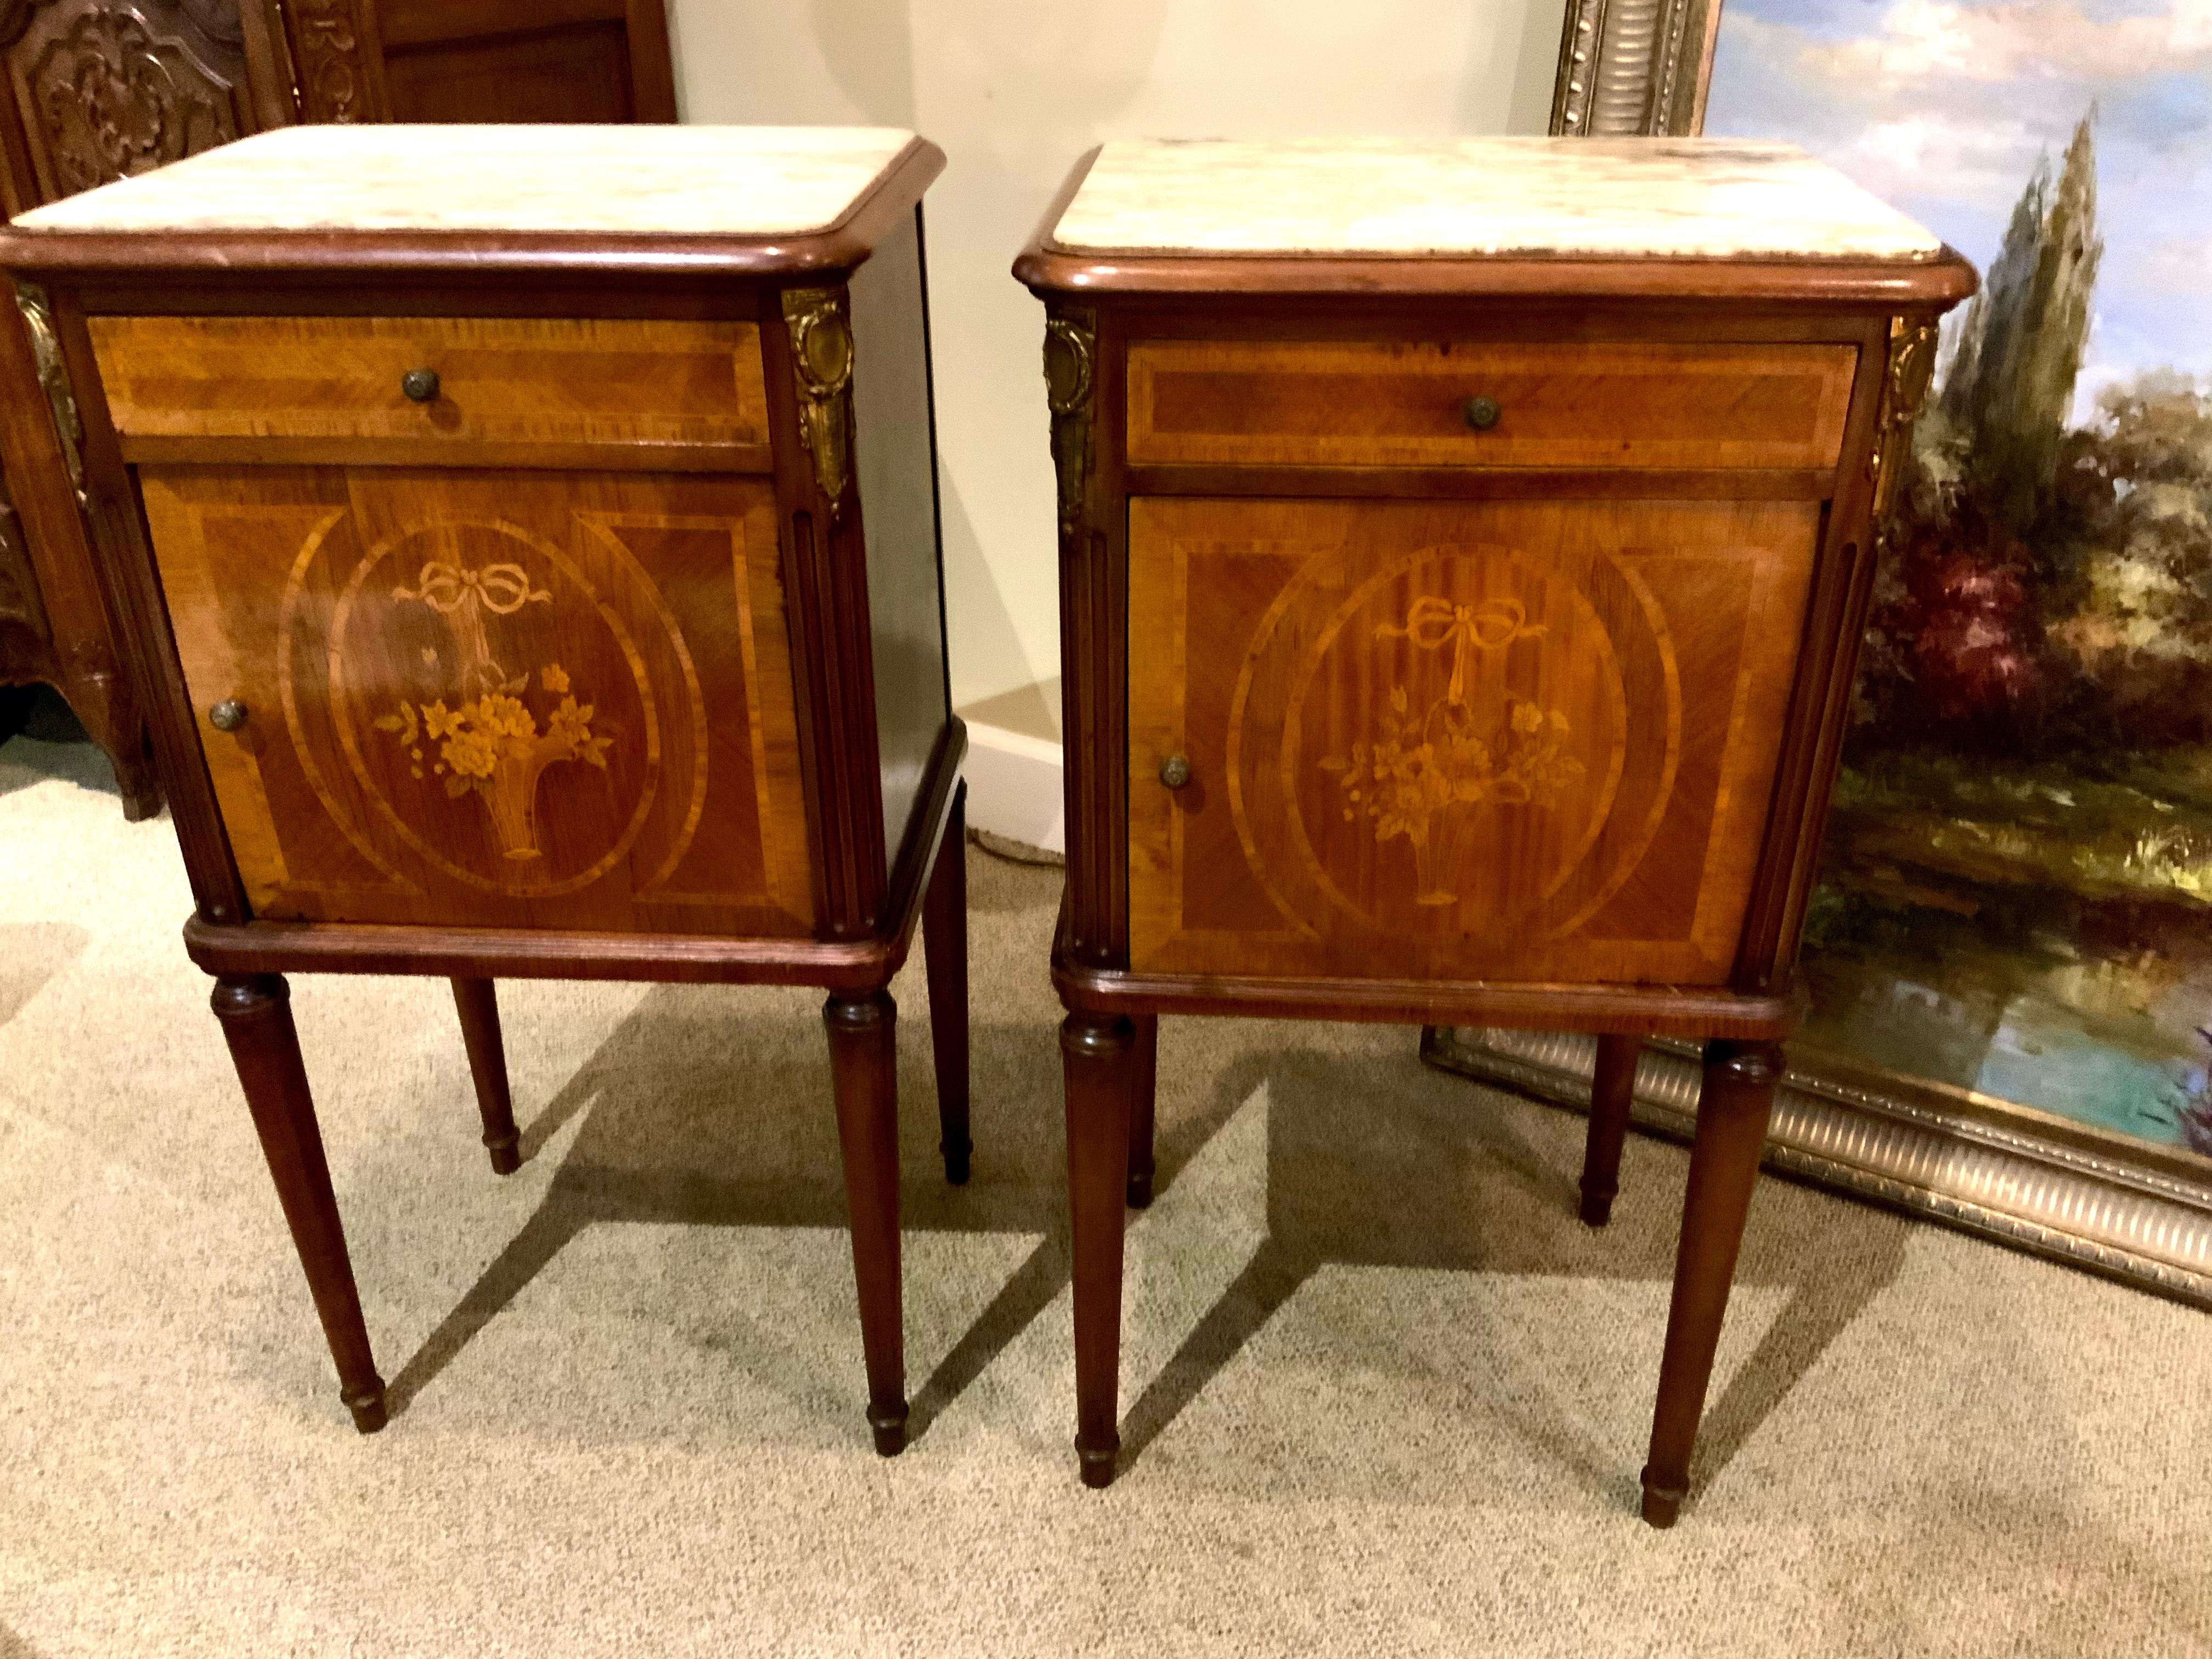 Exceptional marquetry work make this pair especially terrific.
A basket of flowers in marquetry is centered on the front door
Of this piece. A creamy white and beige marble grace the top of
These pieces. A slender shaped leg make these pieces